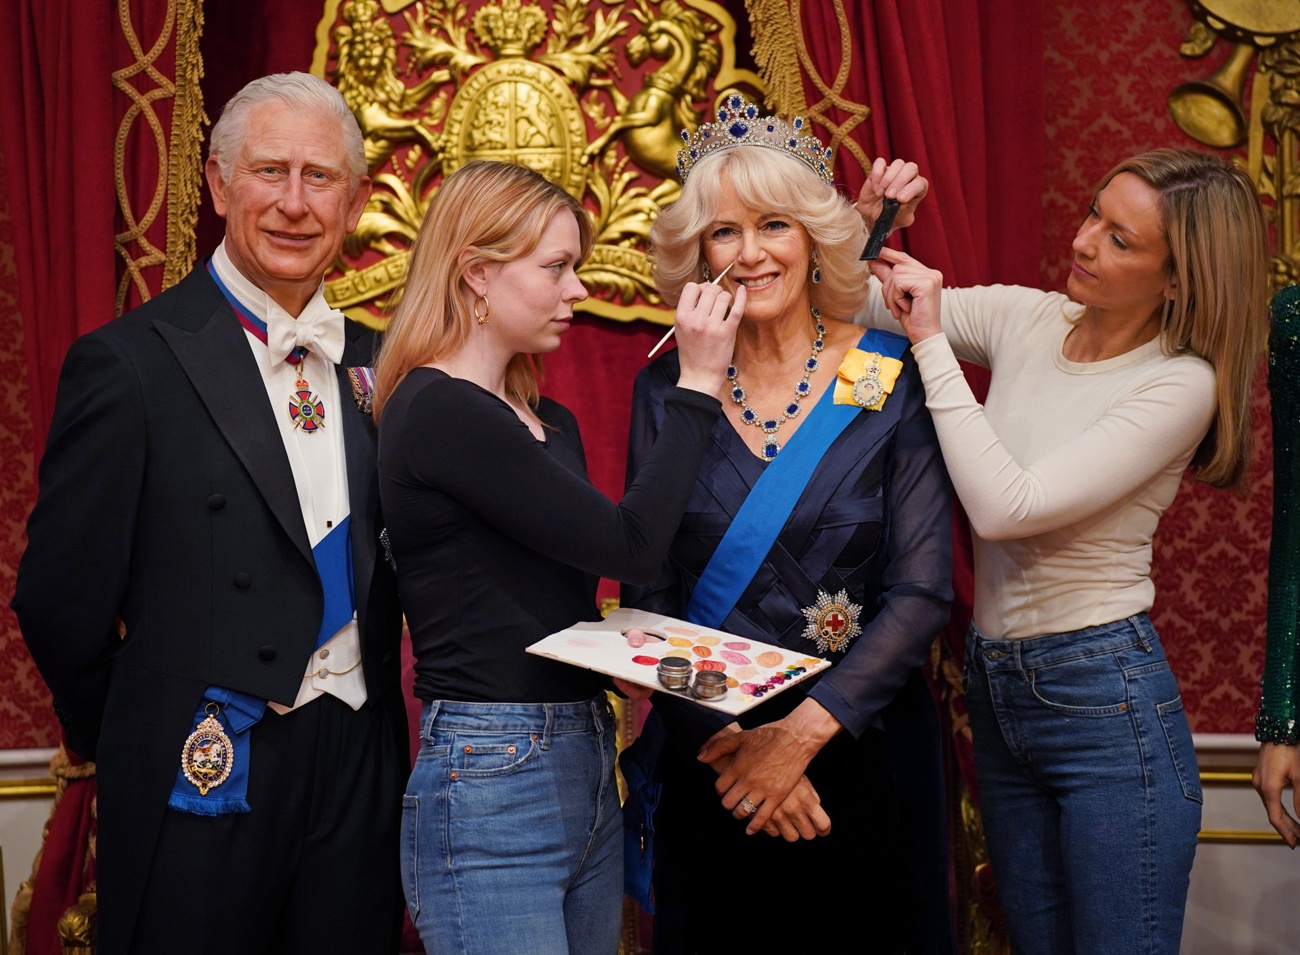 Madame Tussauds Museum London adds Camilla wax figure to its collection